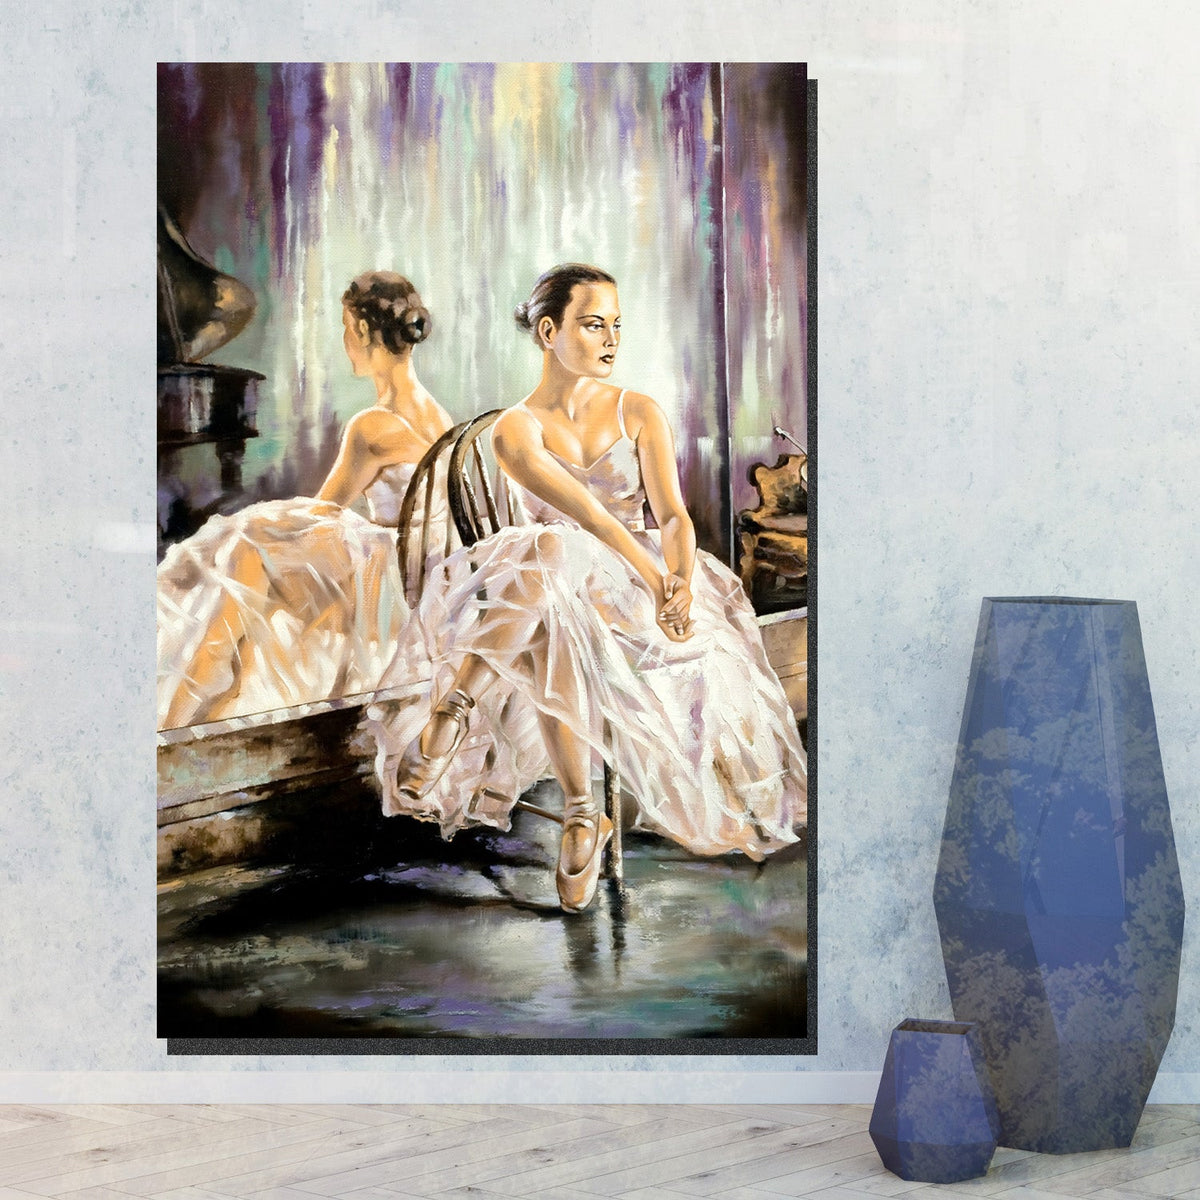 https://cdn.shopify.com/s/files/1/0387/9986/8044/products/PortraitofABallerinaCanvasArtprintStretched-4.jpg